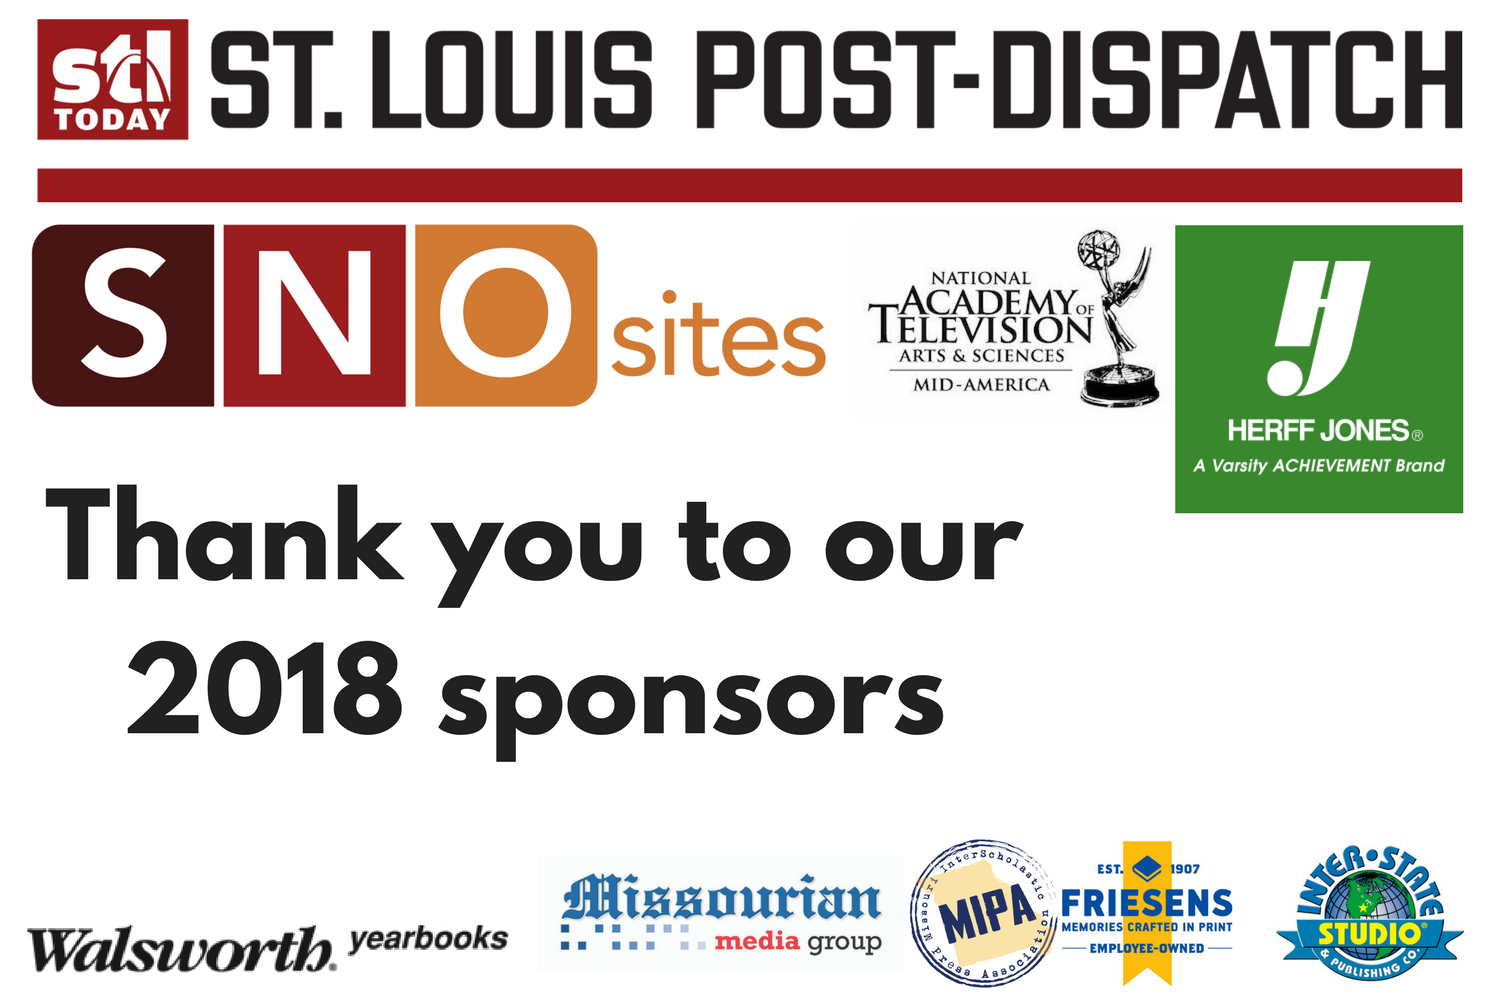 Thank you to our 2018 sponsors